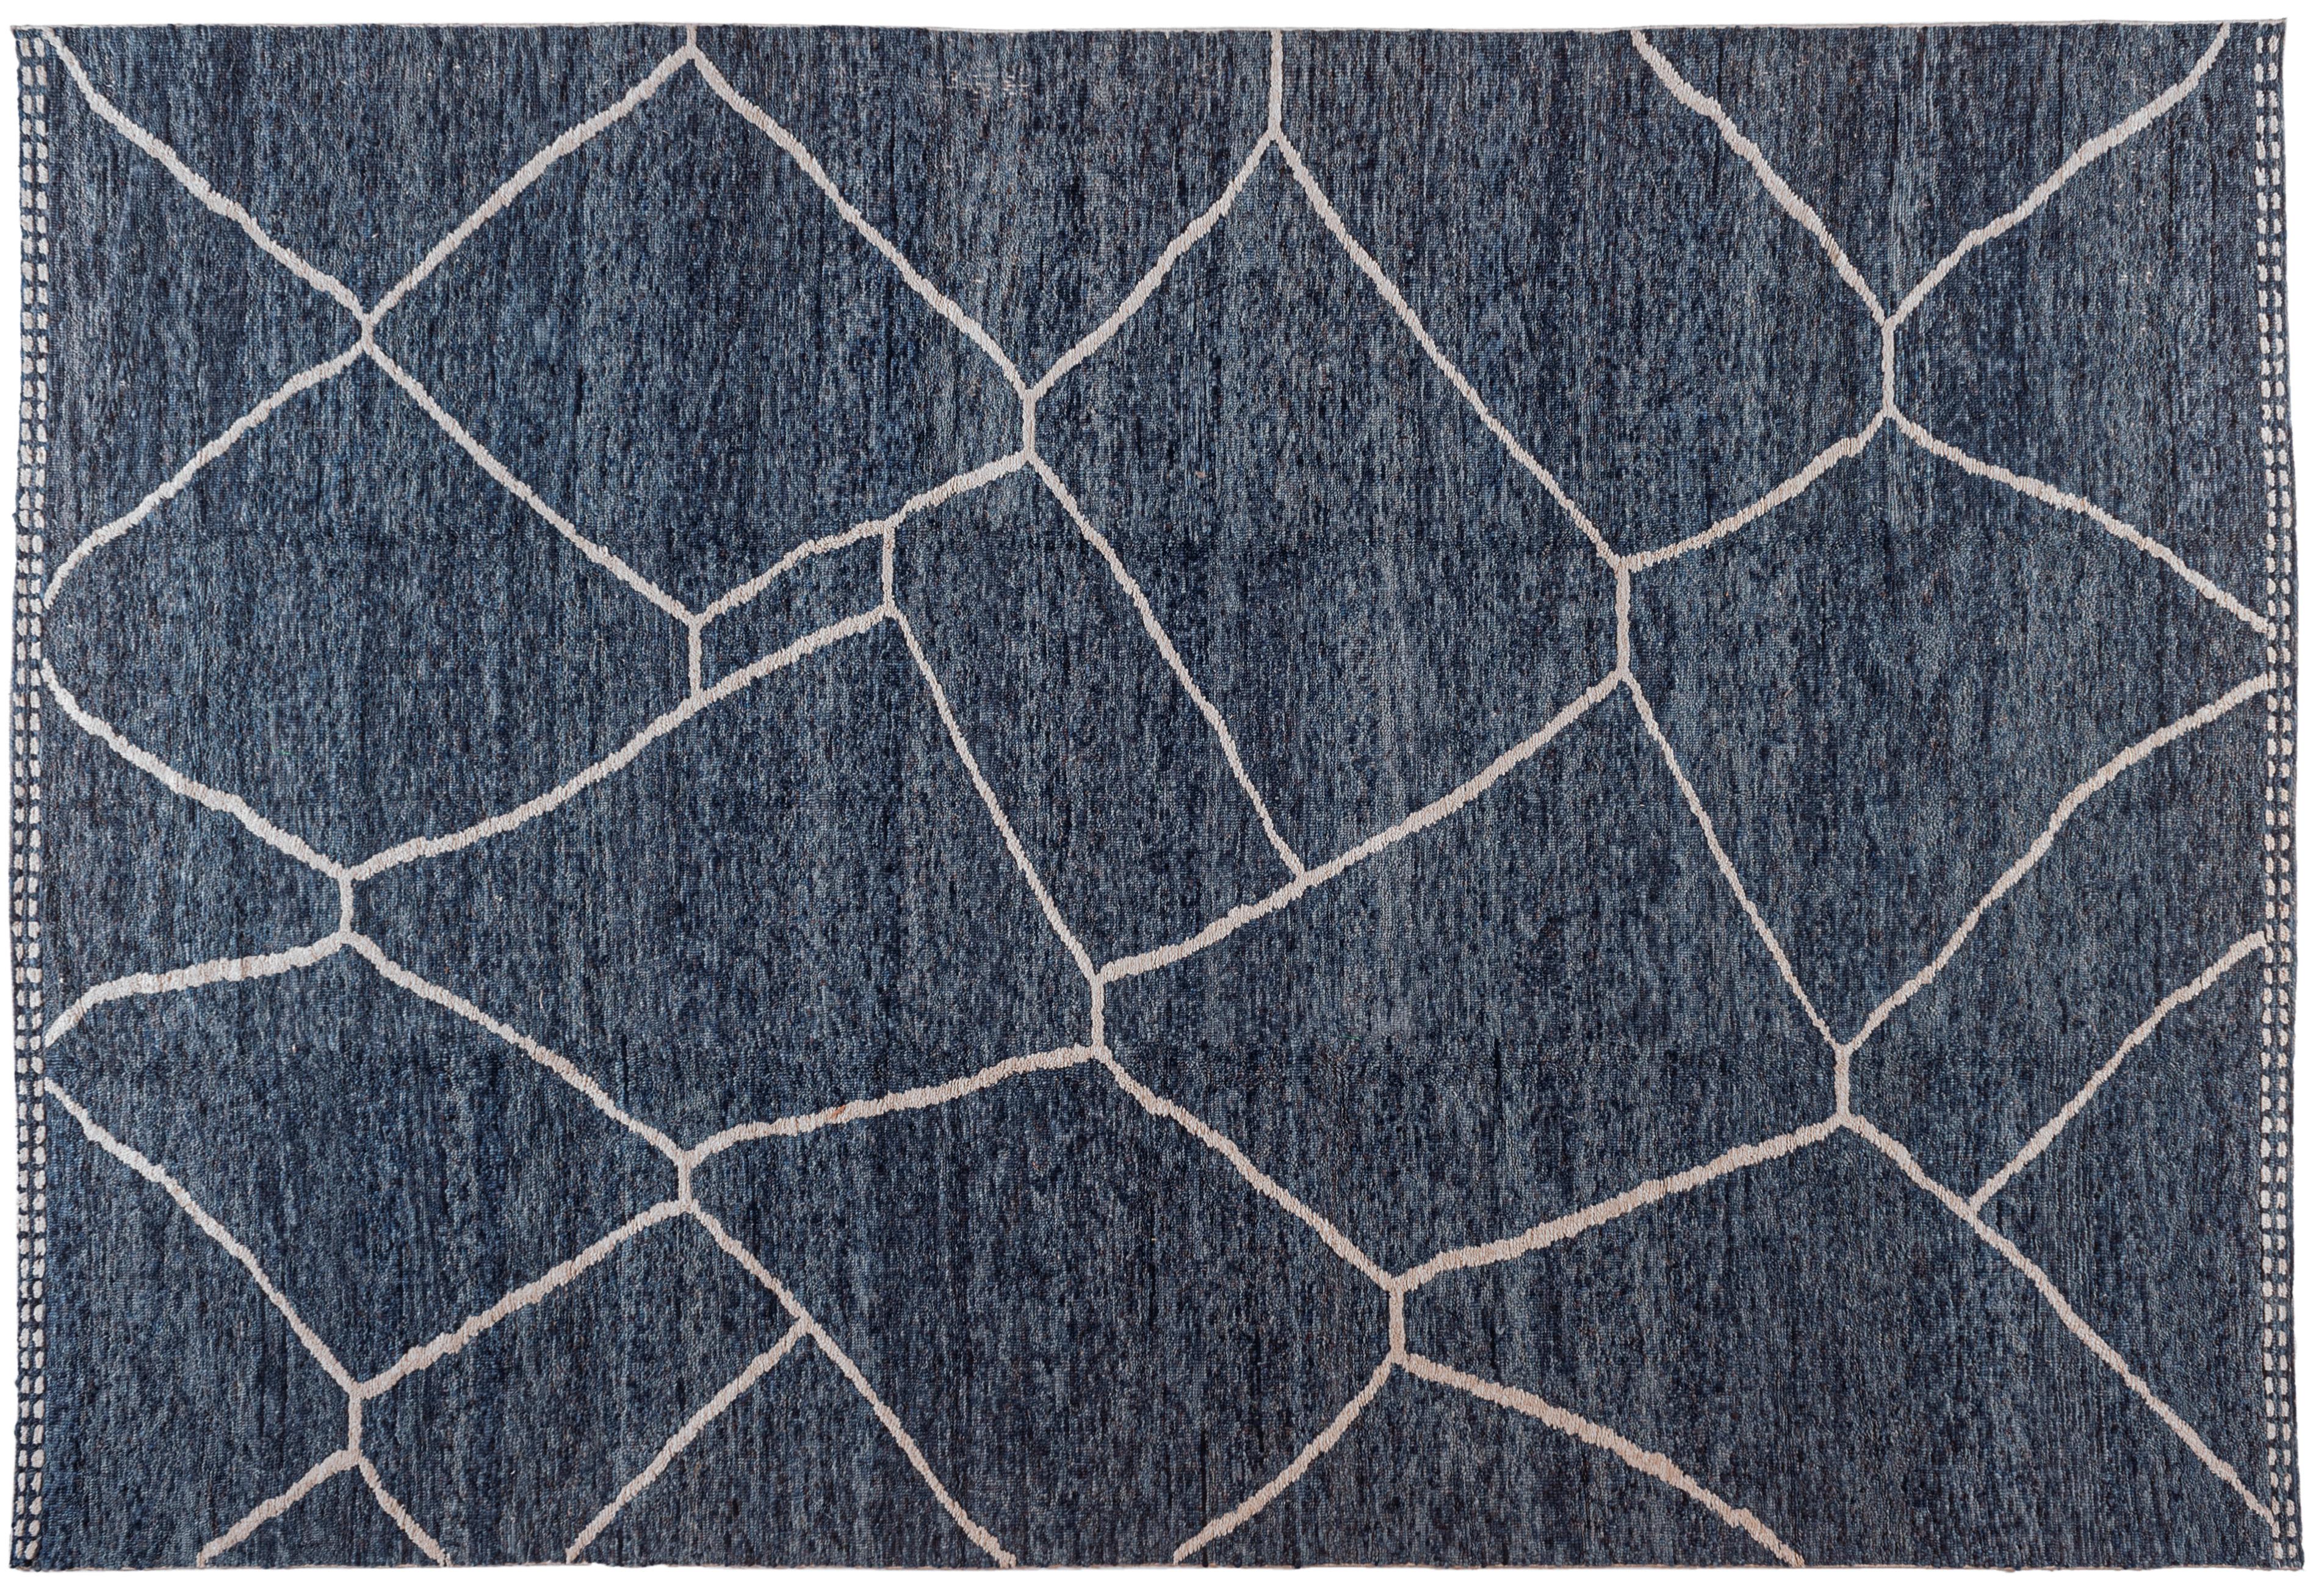 Blue Moroccan inspired rug.